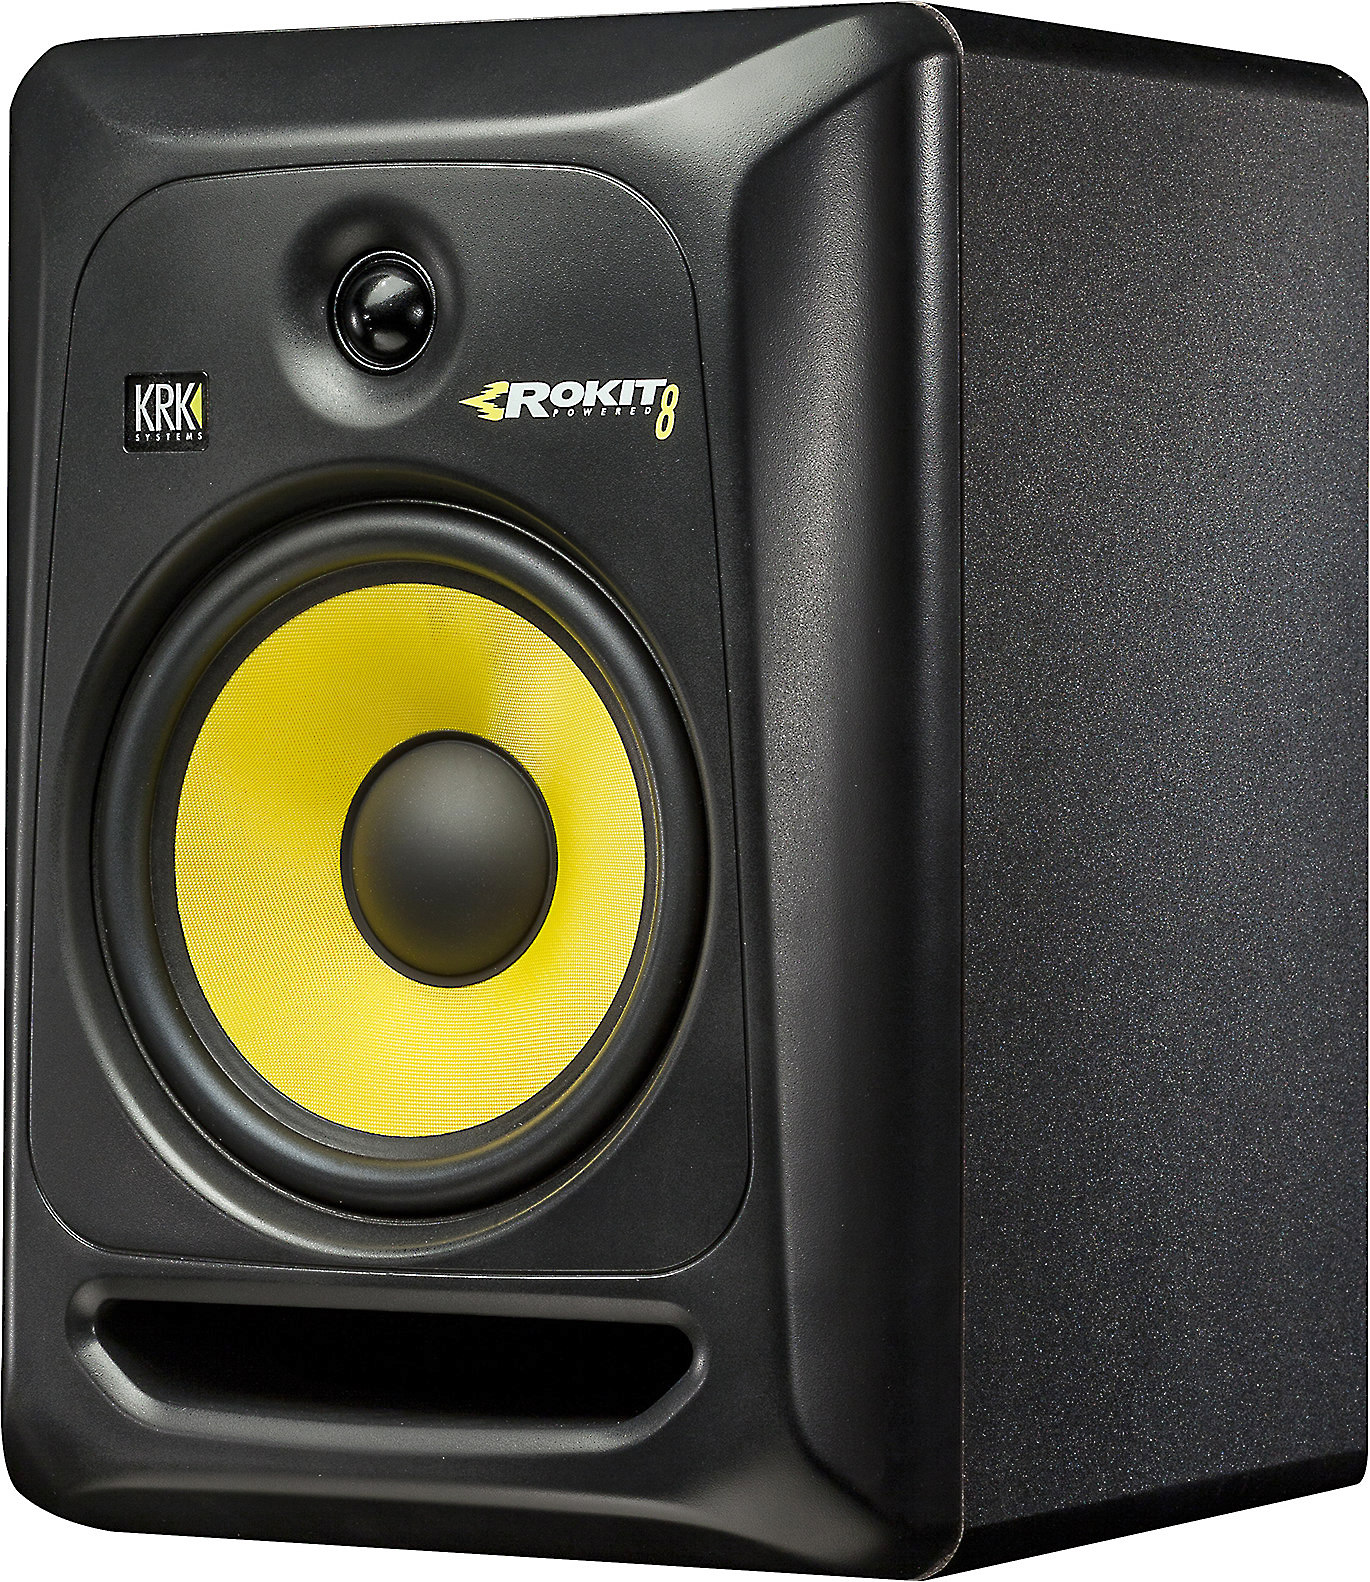 Samson Resolv Se6 Active Studio Monitor This 100 Watt Powered Monitor Delivers An Accurate Picture Of Your Mix For A Nice Price And With 6 Woofers They Re A